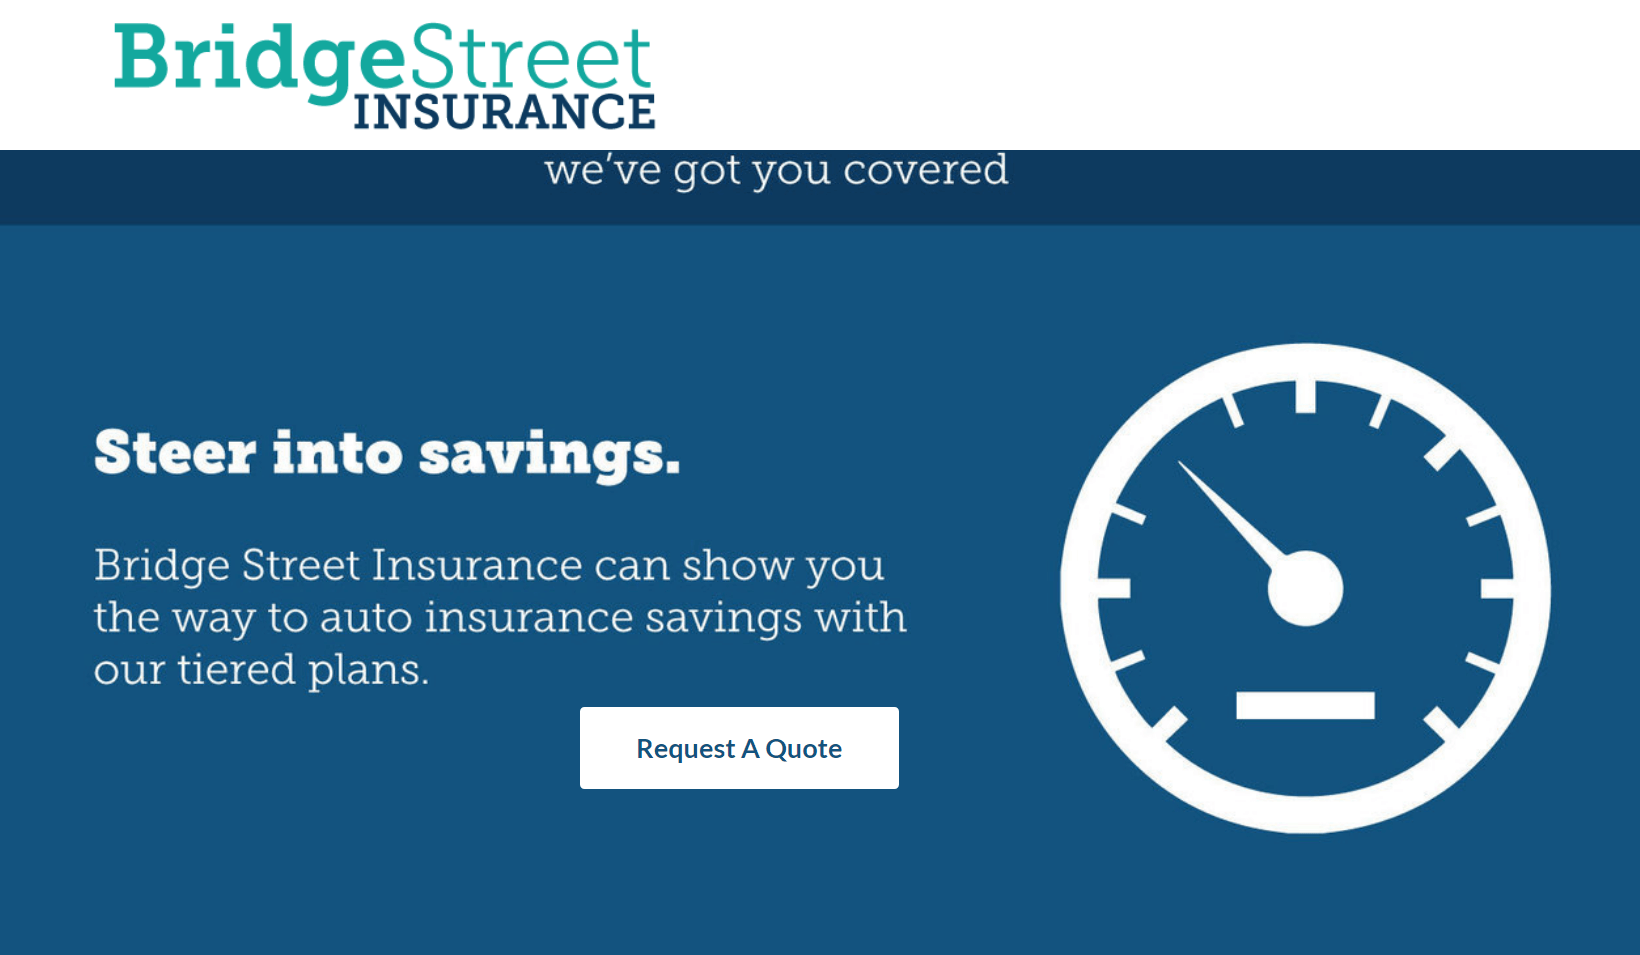 Screenshot of a web page for Bridge Street Insurance featured a Request a Quote call to action button